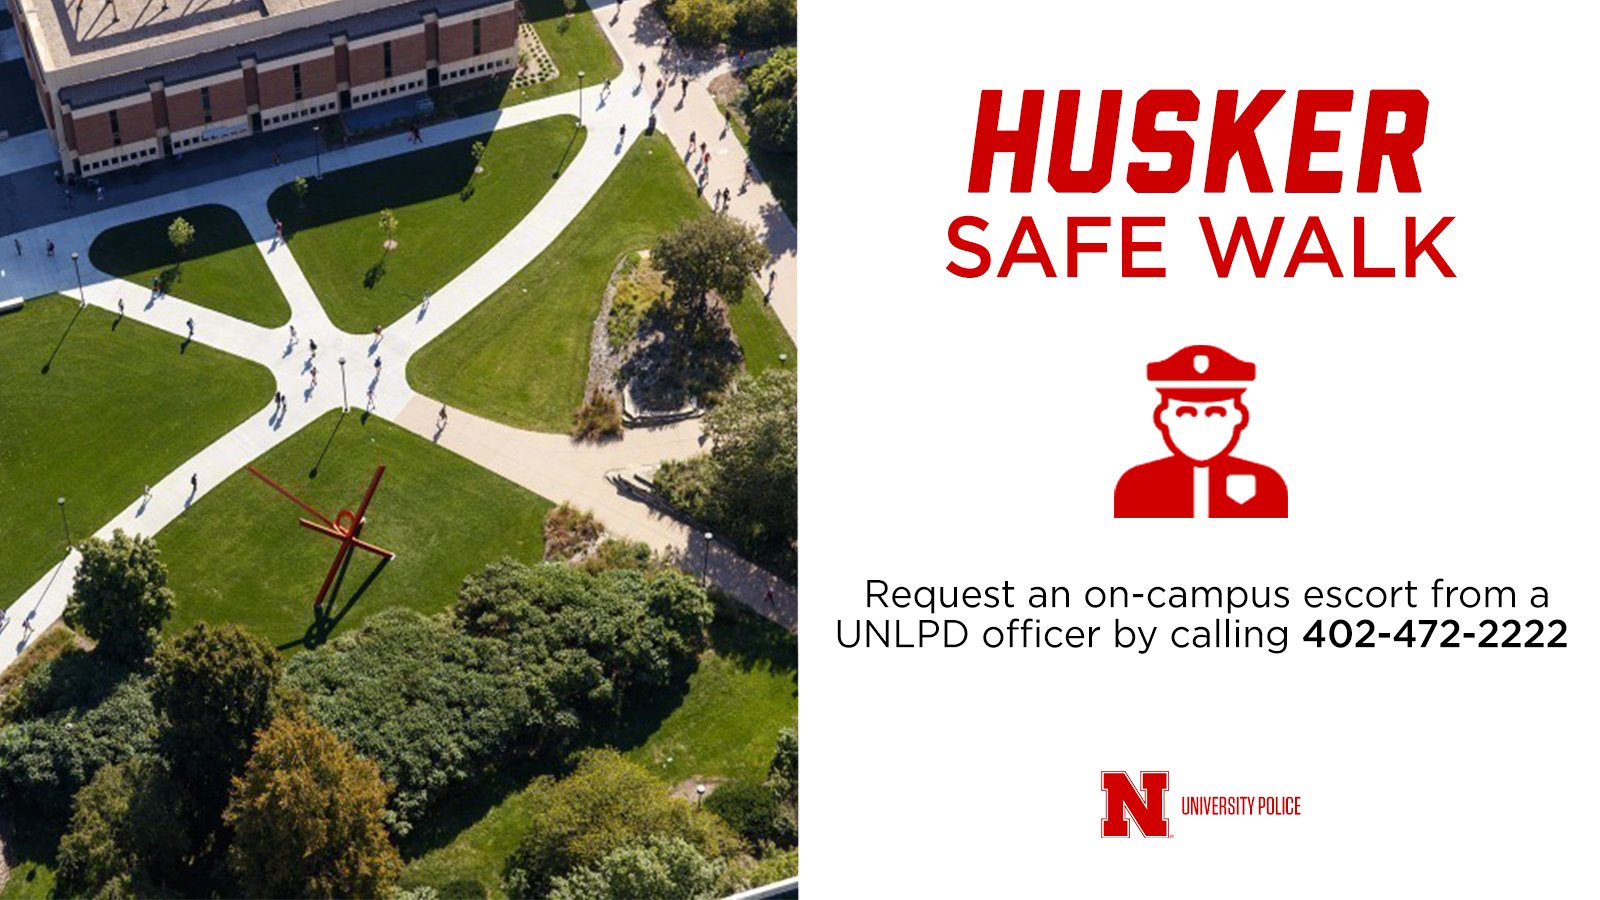 Husker Safe Walk | Request an on-campus escort from a UNLPD officer by calling 402-472-2222.